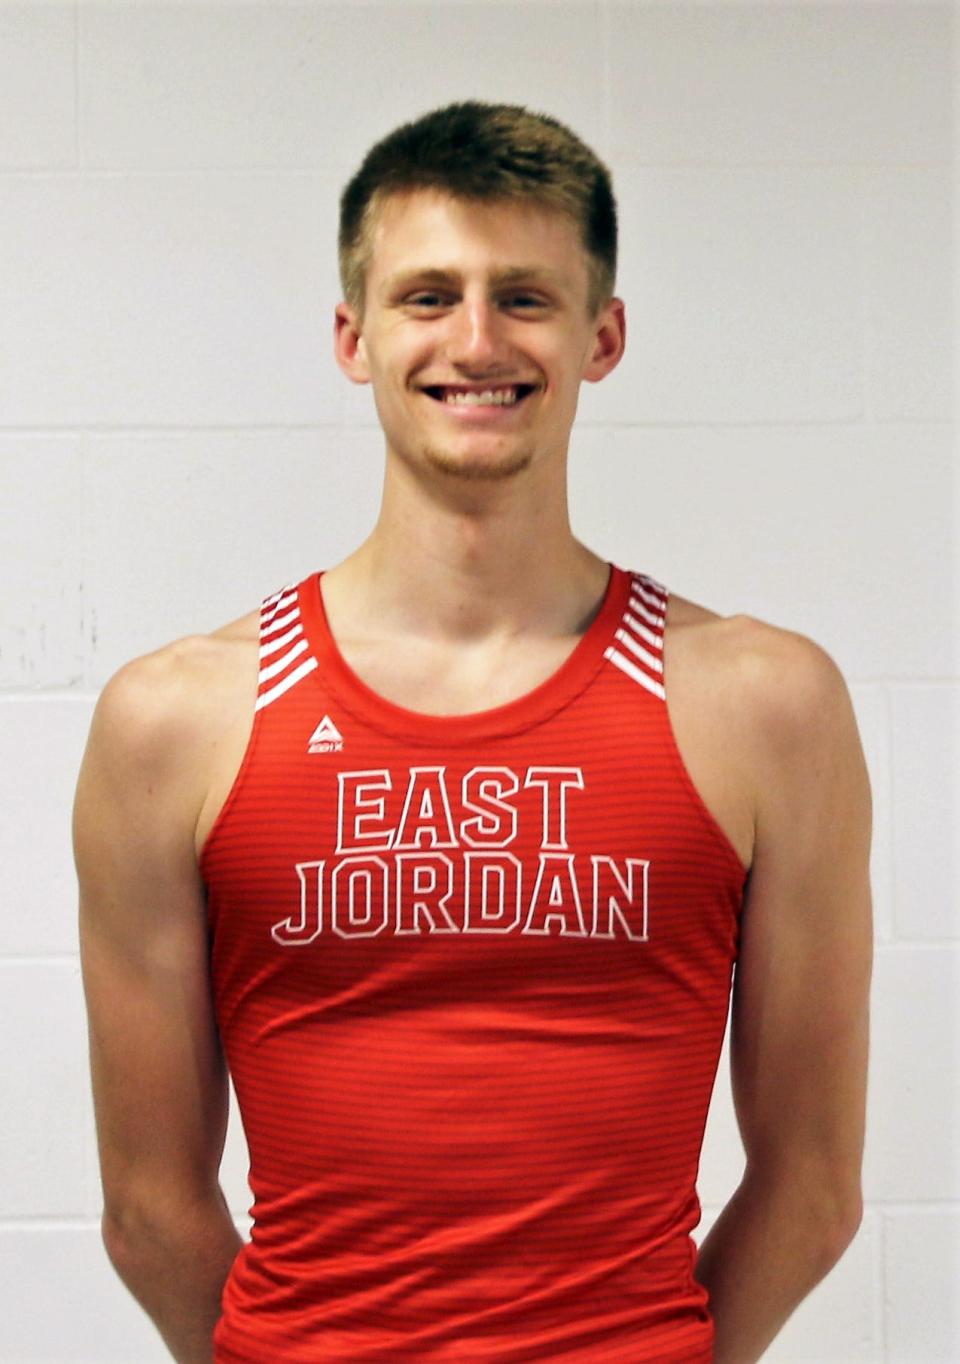 East Jordan's Preston Malpass set a new school record, breaking his own previous mark, in the high jump at the state finals.